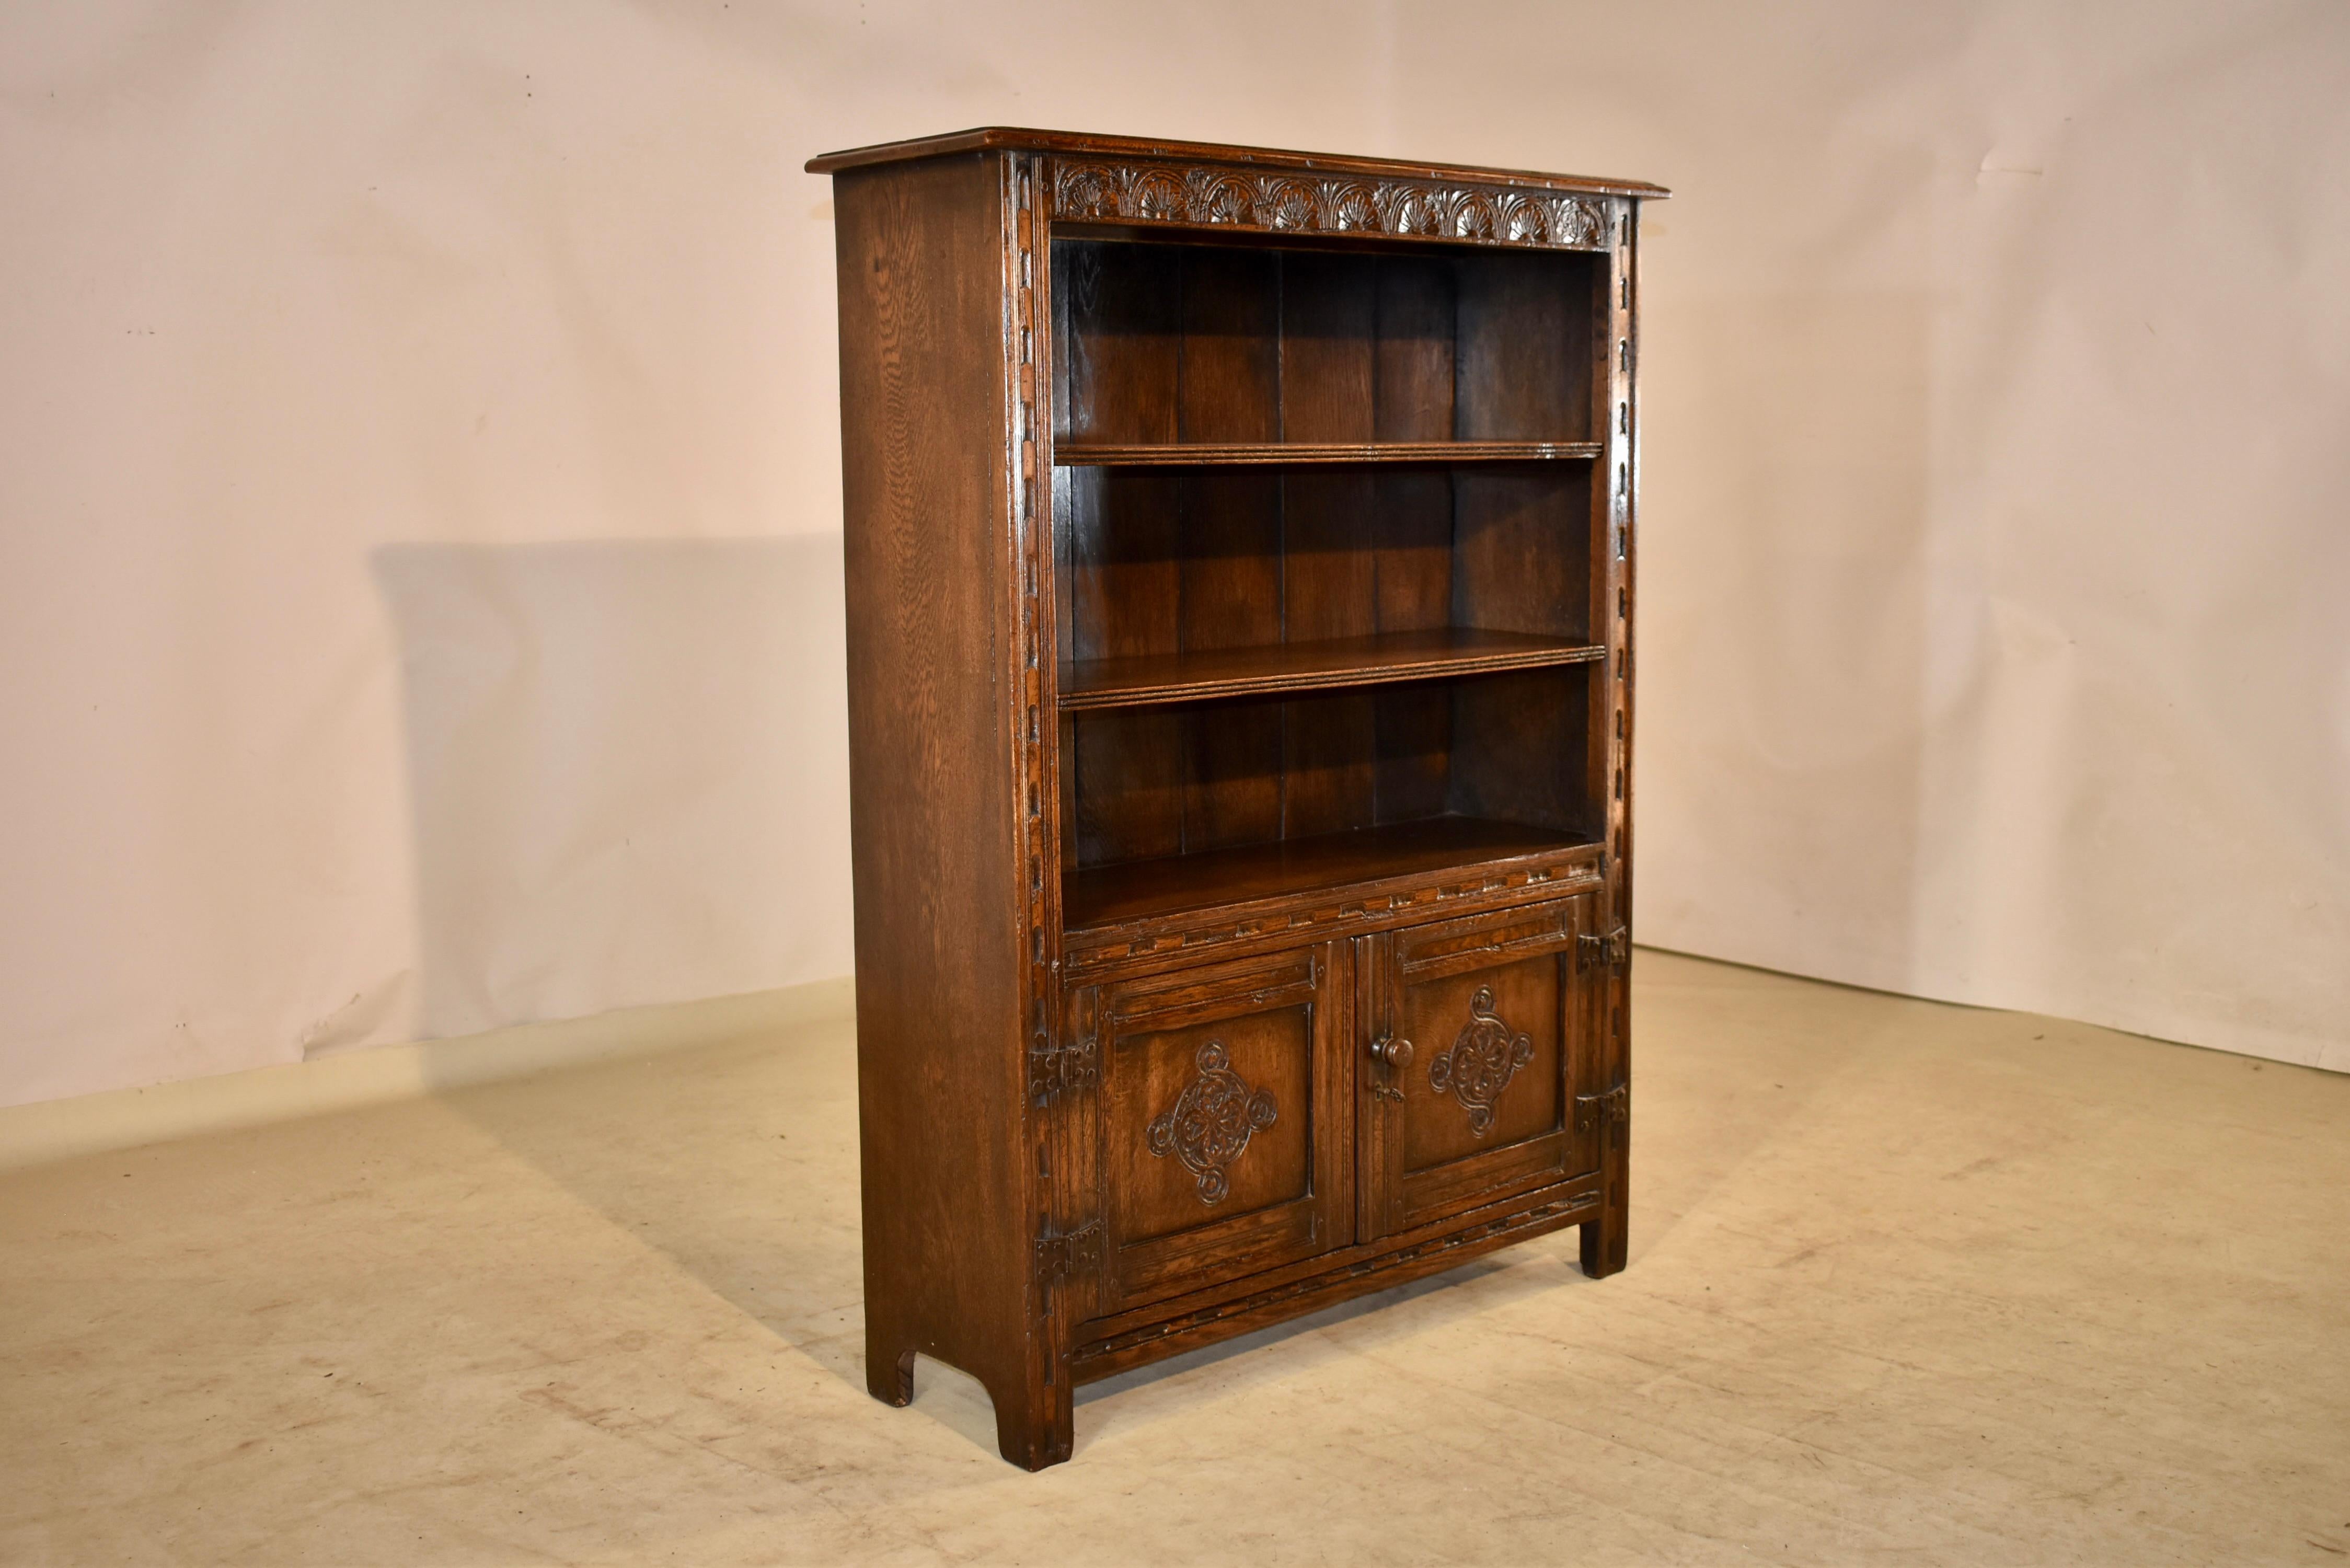 Early 20th Century C. 1900 English Oak Bookcase For Sale